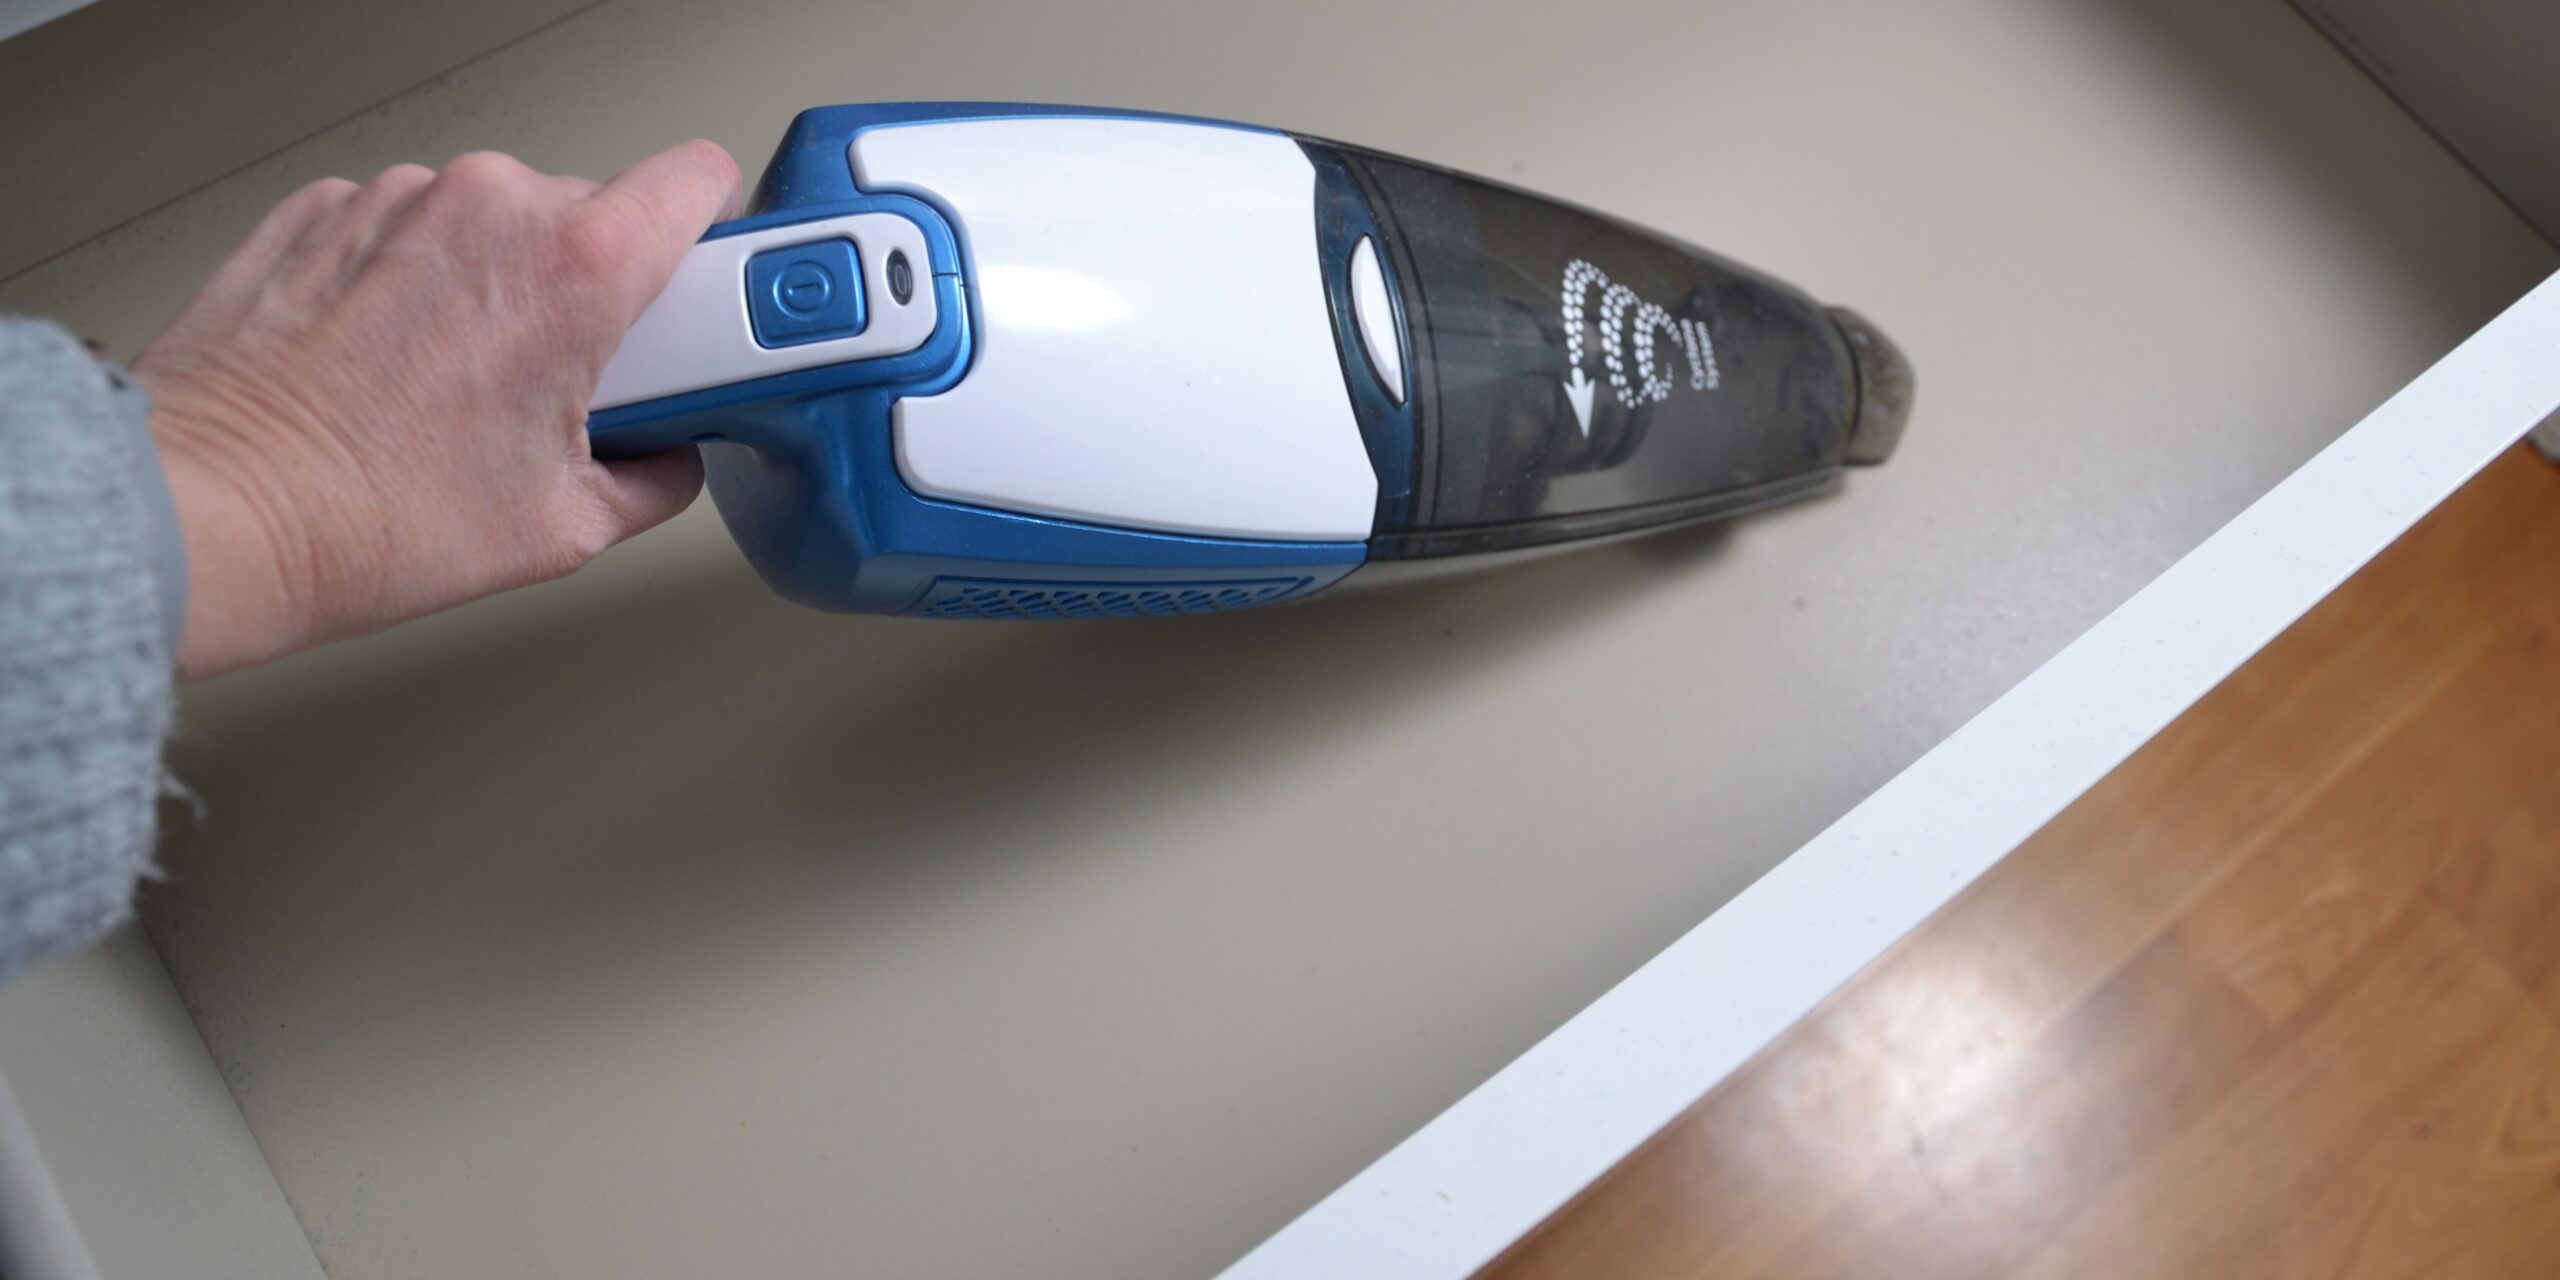 Super Awesome Benefits of a Handheld Vacuum